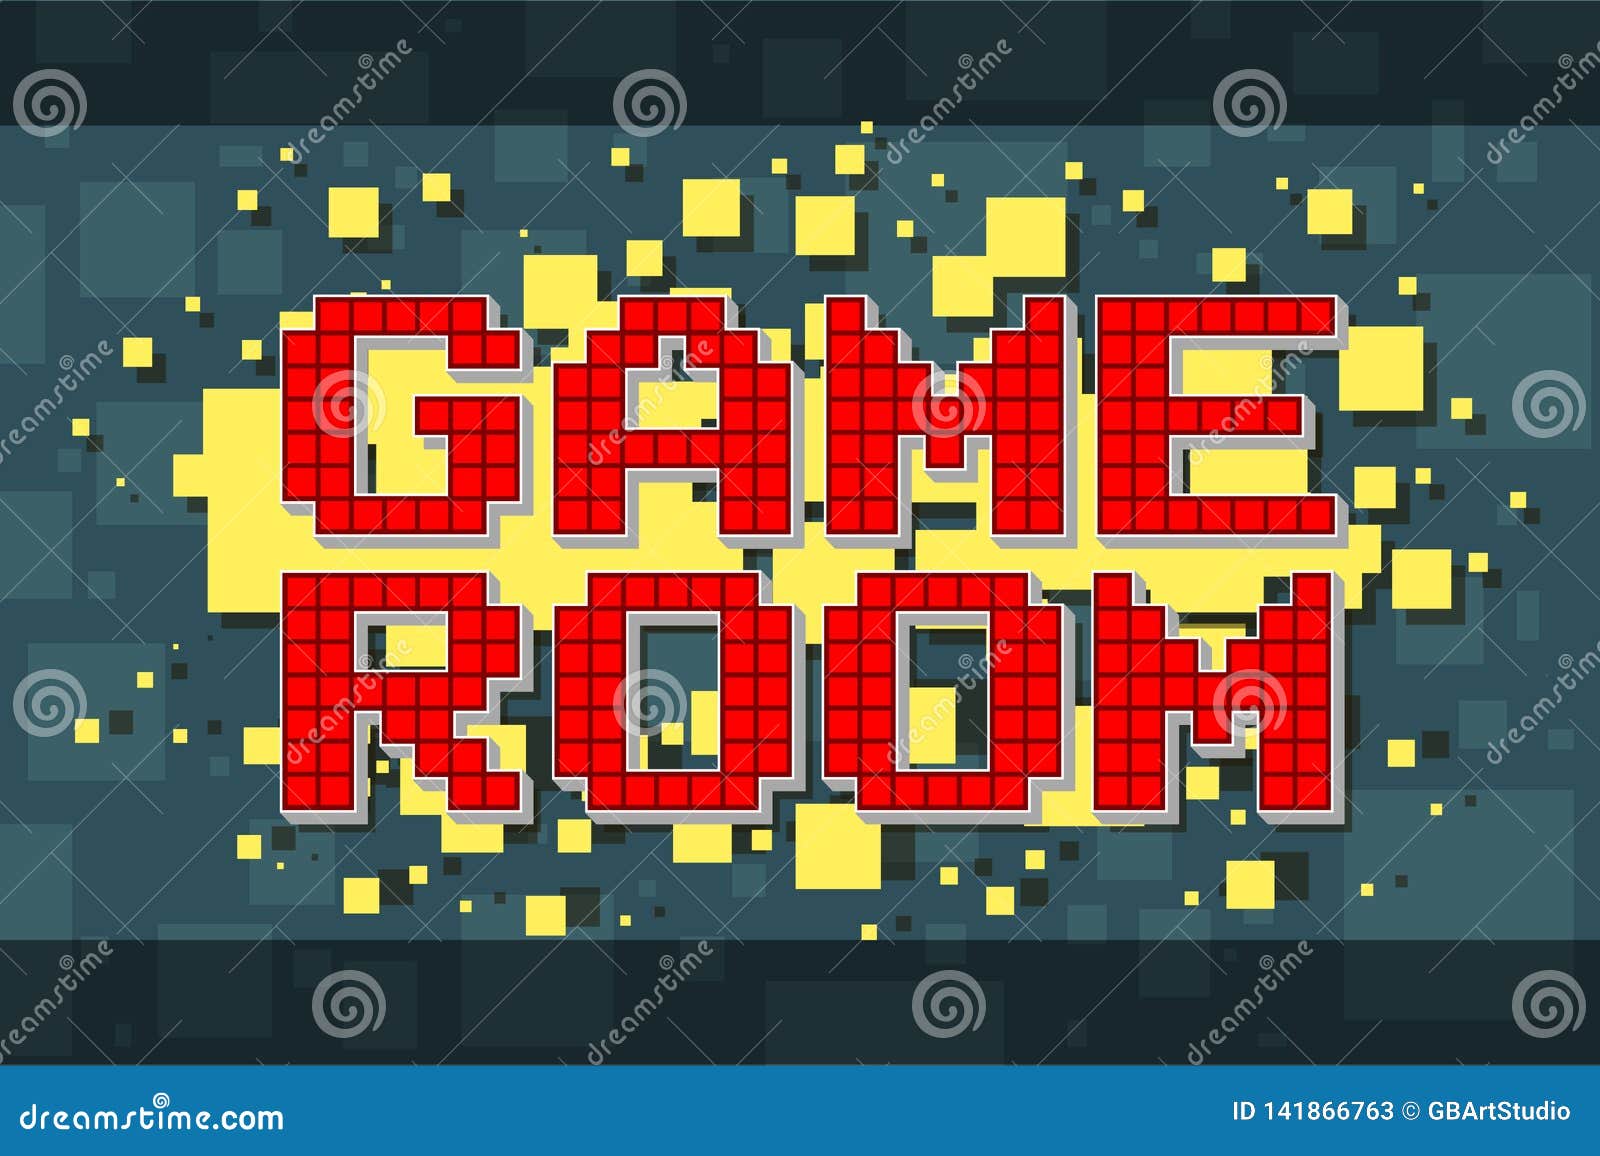 Red Pixel Retro Game Room Button For Video Games Stock Vector Illustration Of Decorative Navigation 141866763